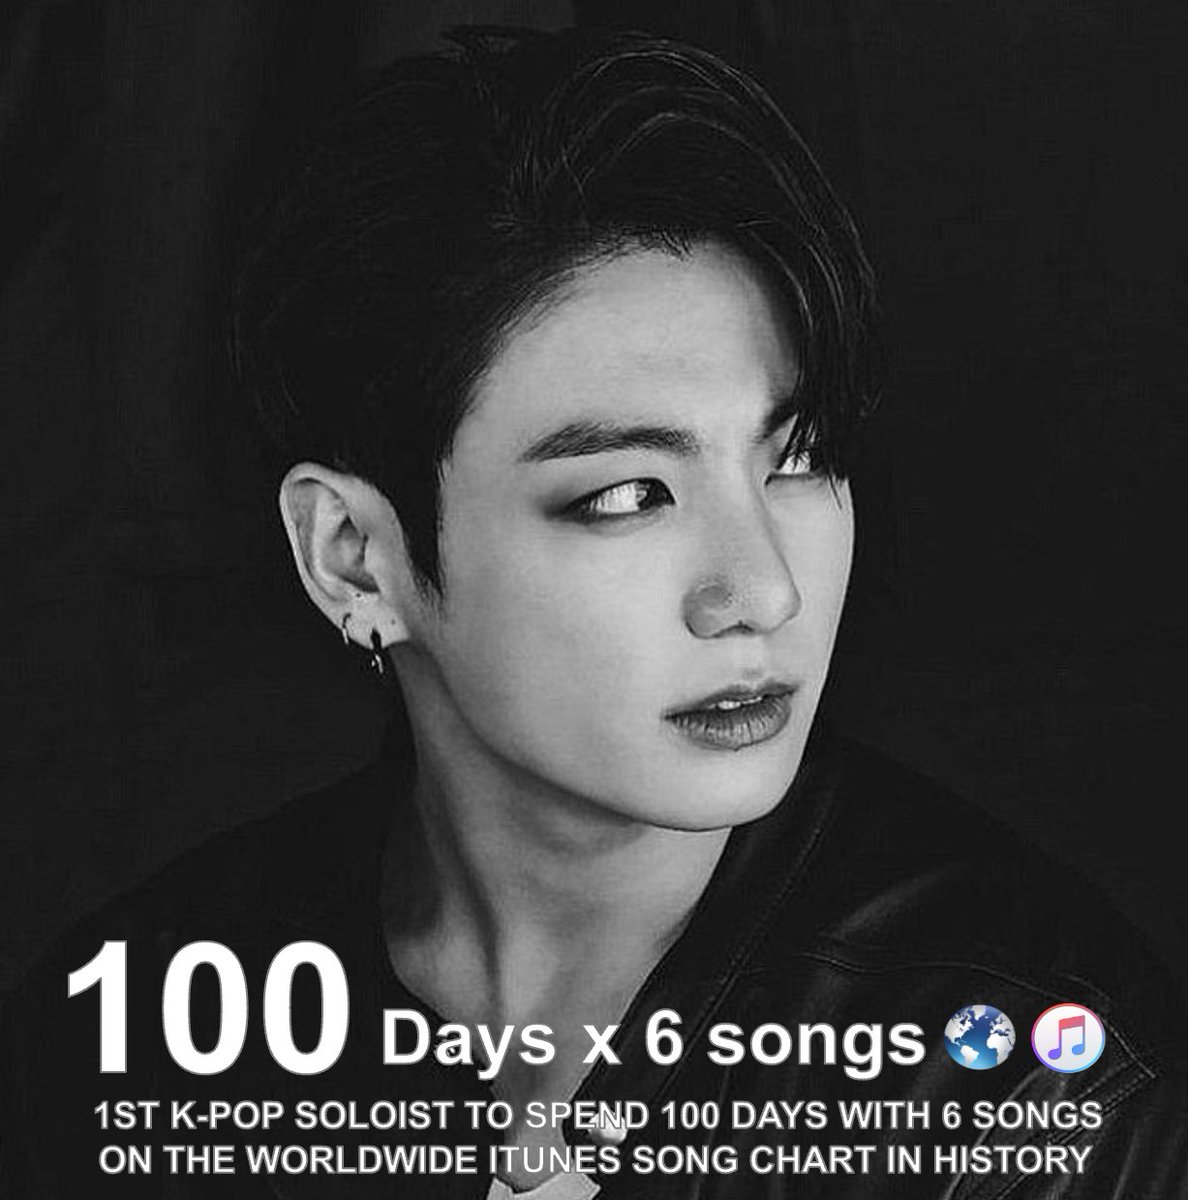 #JUNGKOOK is the K-soloist with the Most tracks spending 100 days on the Worldwide iTunes song chart (6)! 💪🥇🇰🇷👨‍🎤 📈💯🕛🌎🎵✖️6⃣🎶🐐🔥👑🖤